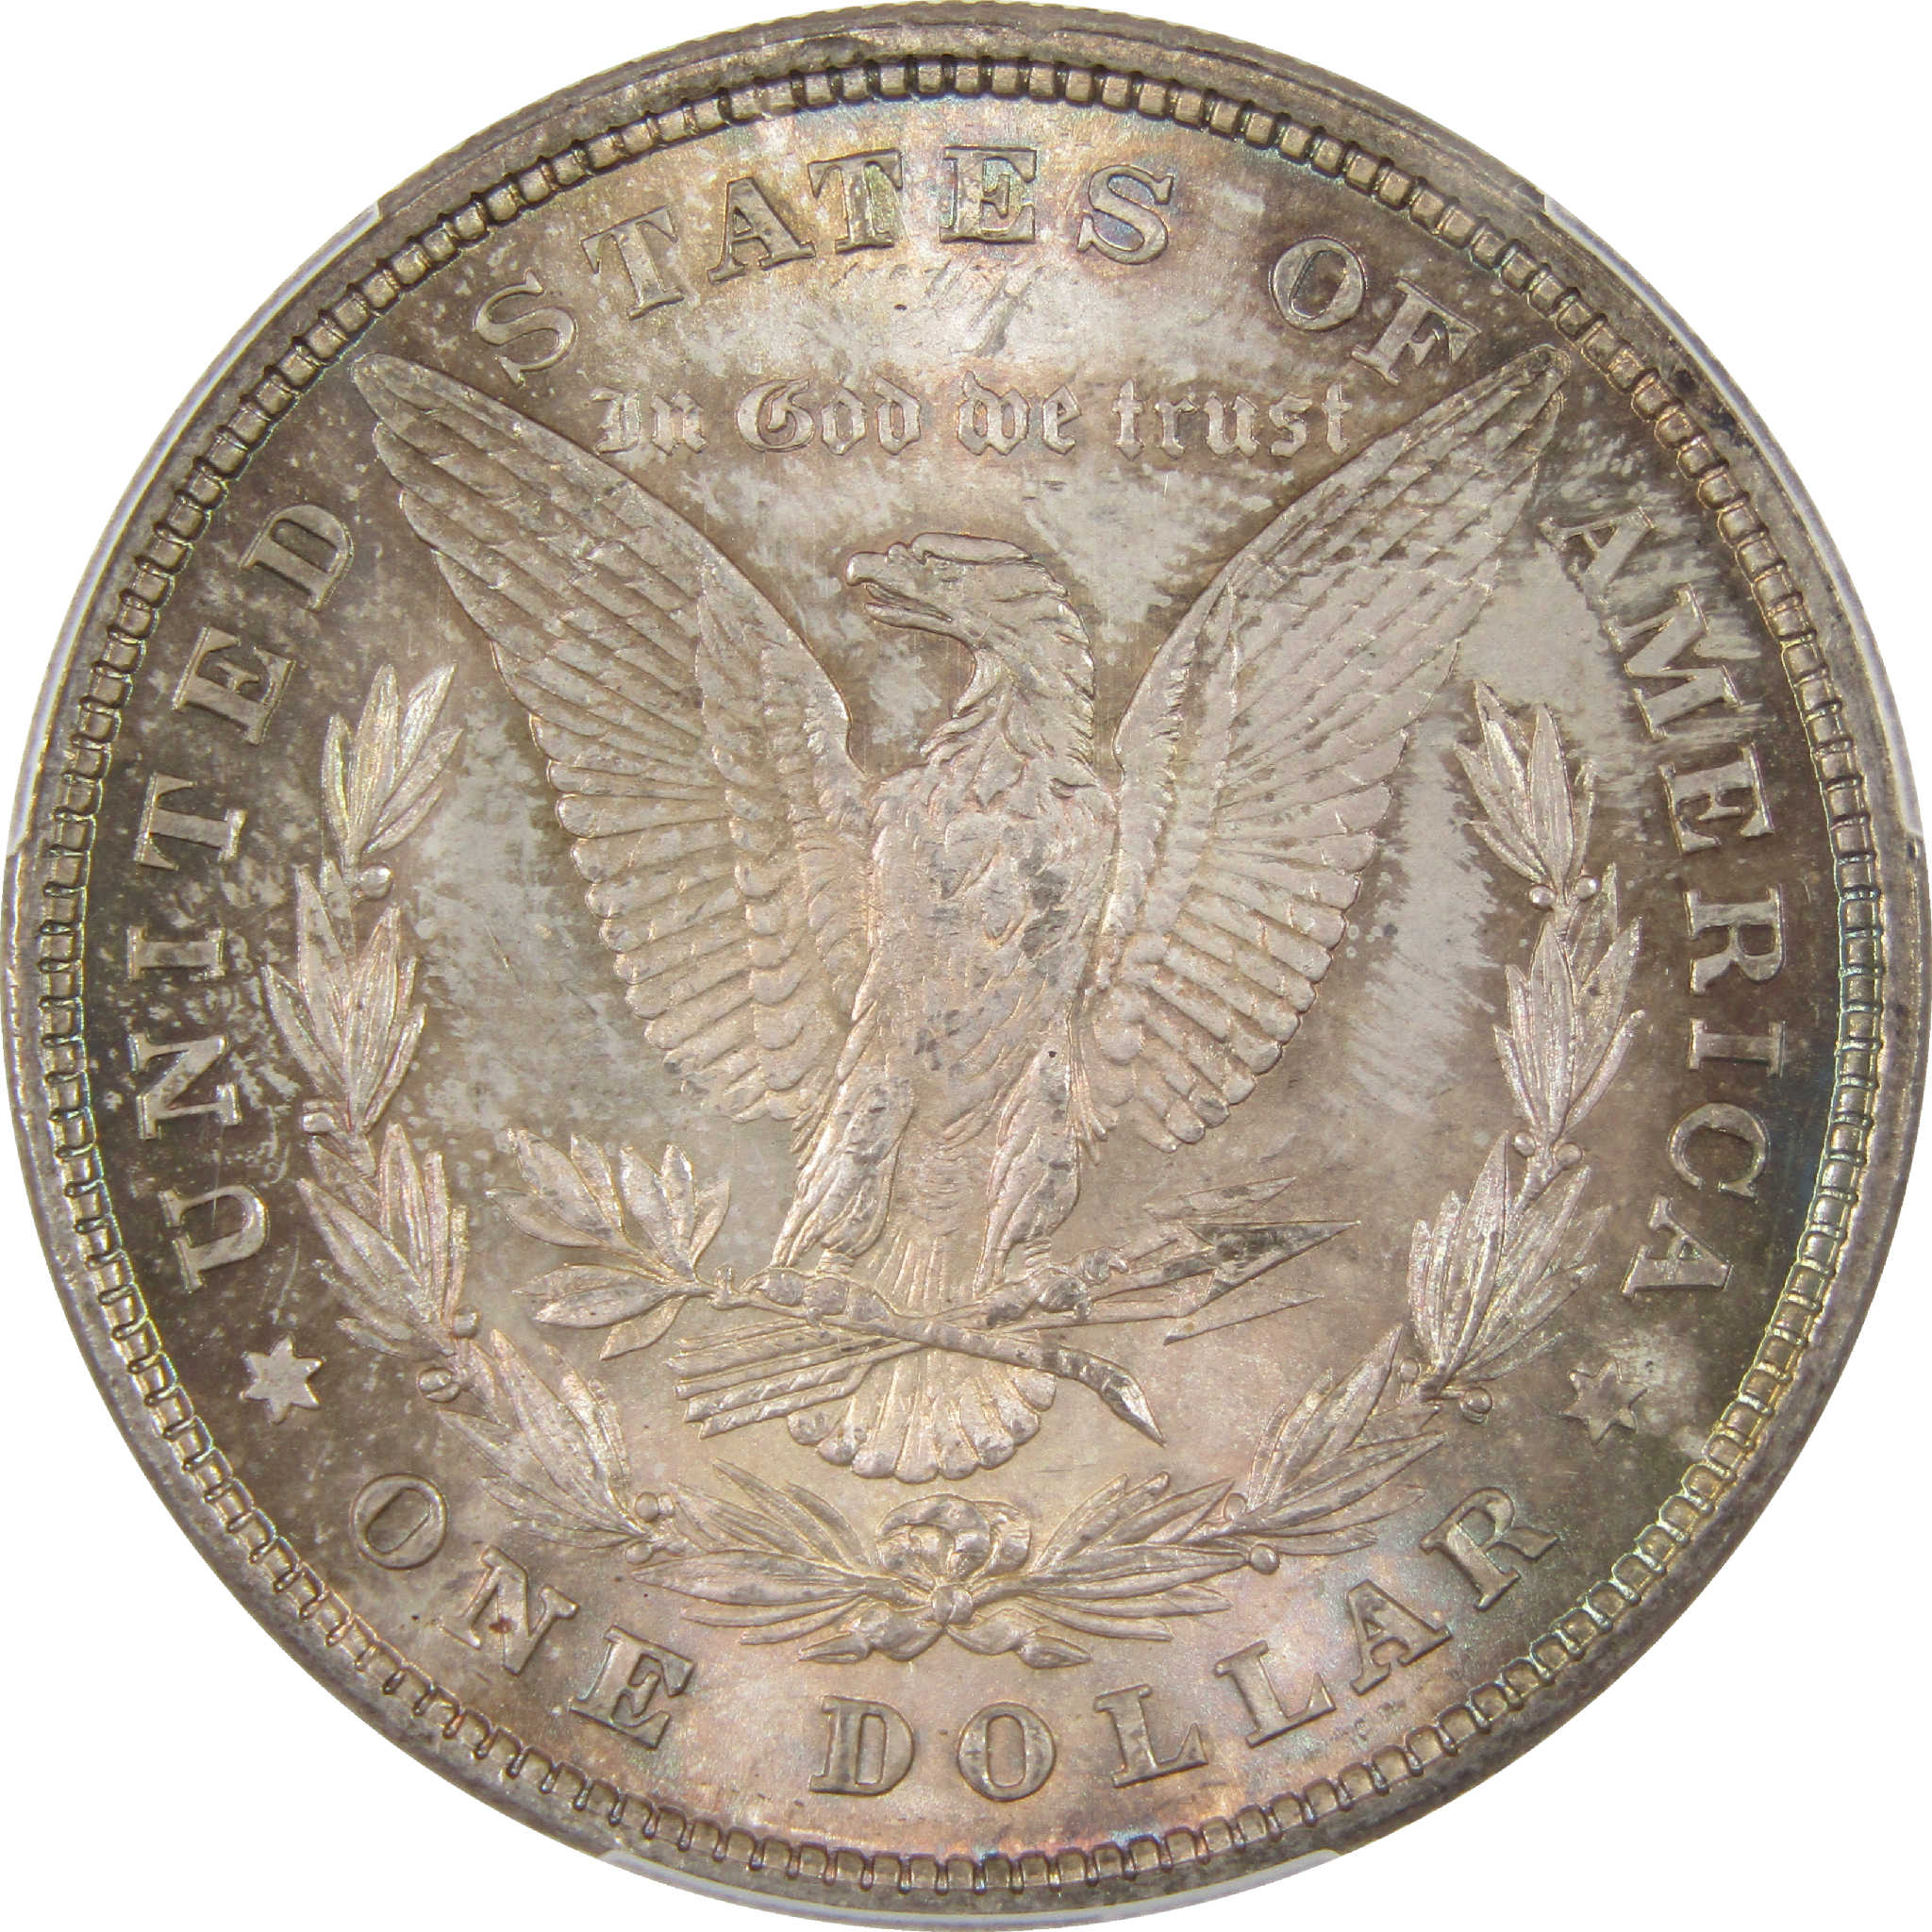 1878 8TF Morgan Dollar MS 63 PCGS Silver $1 Uncirculated SKU:I11318 - Morgan coin - Morgan silver dollar - Morgan silver dollar for sale - Profile Coins &amp; Collectibles